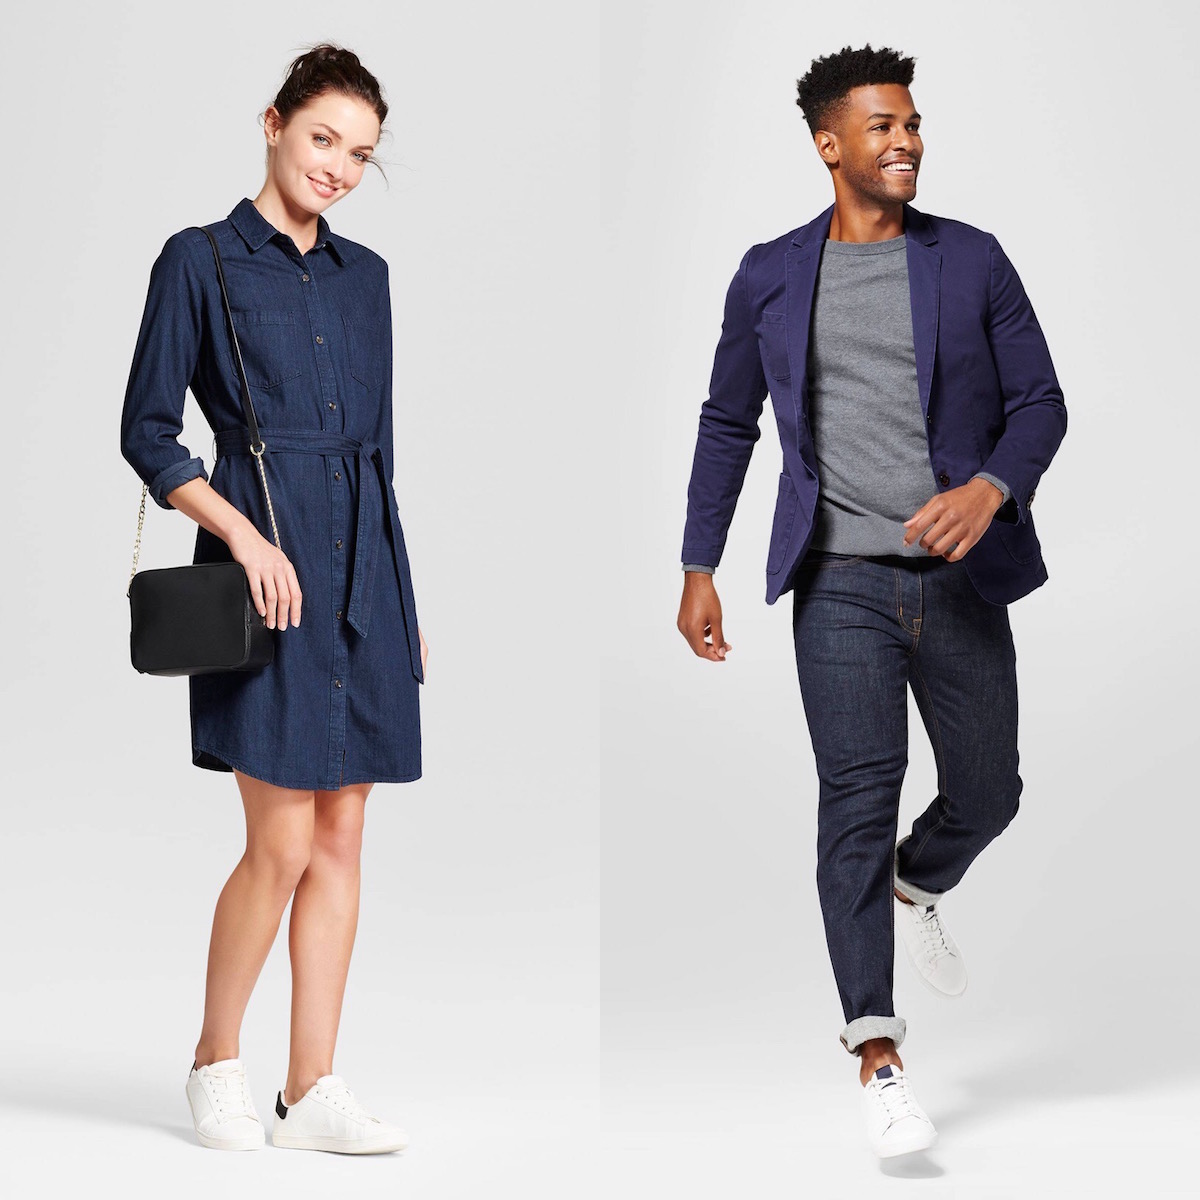 A white woman wearing a dark denim shirt dress, and a black man wearing a T-shirt and jeans with a blue blazer